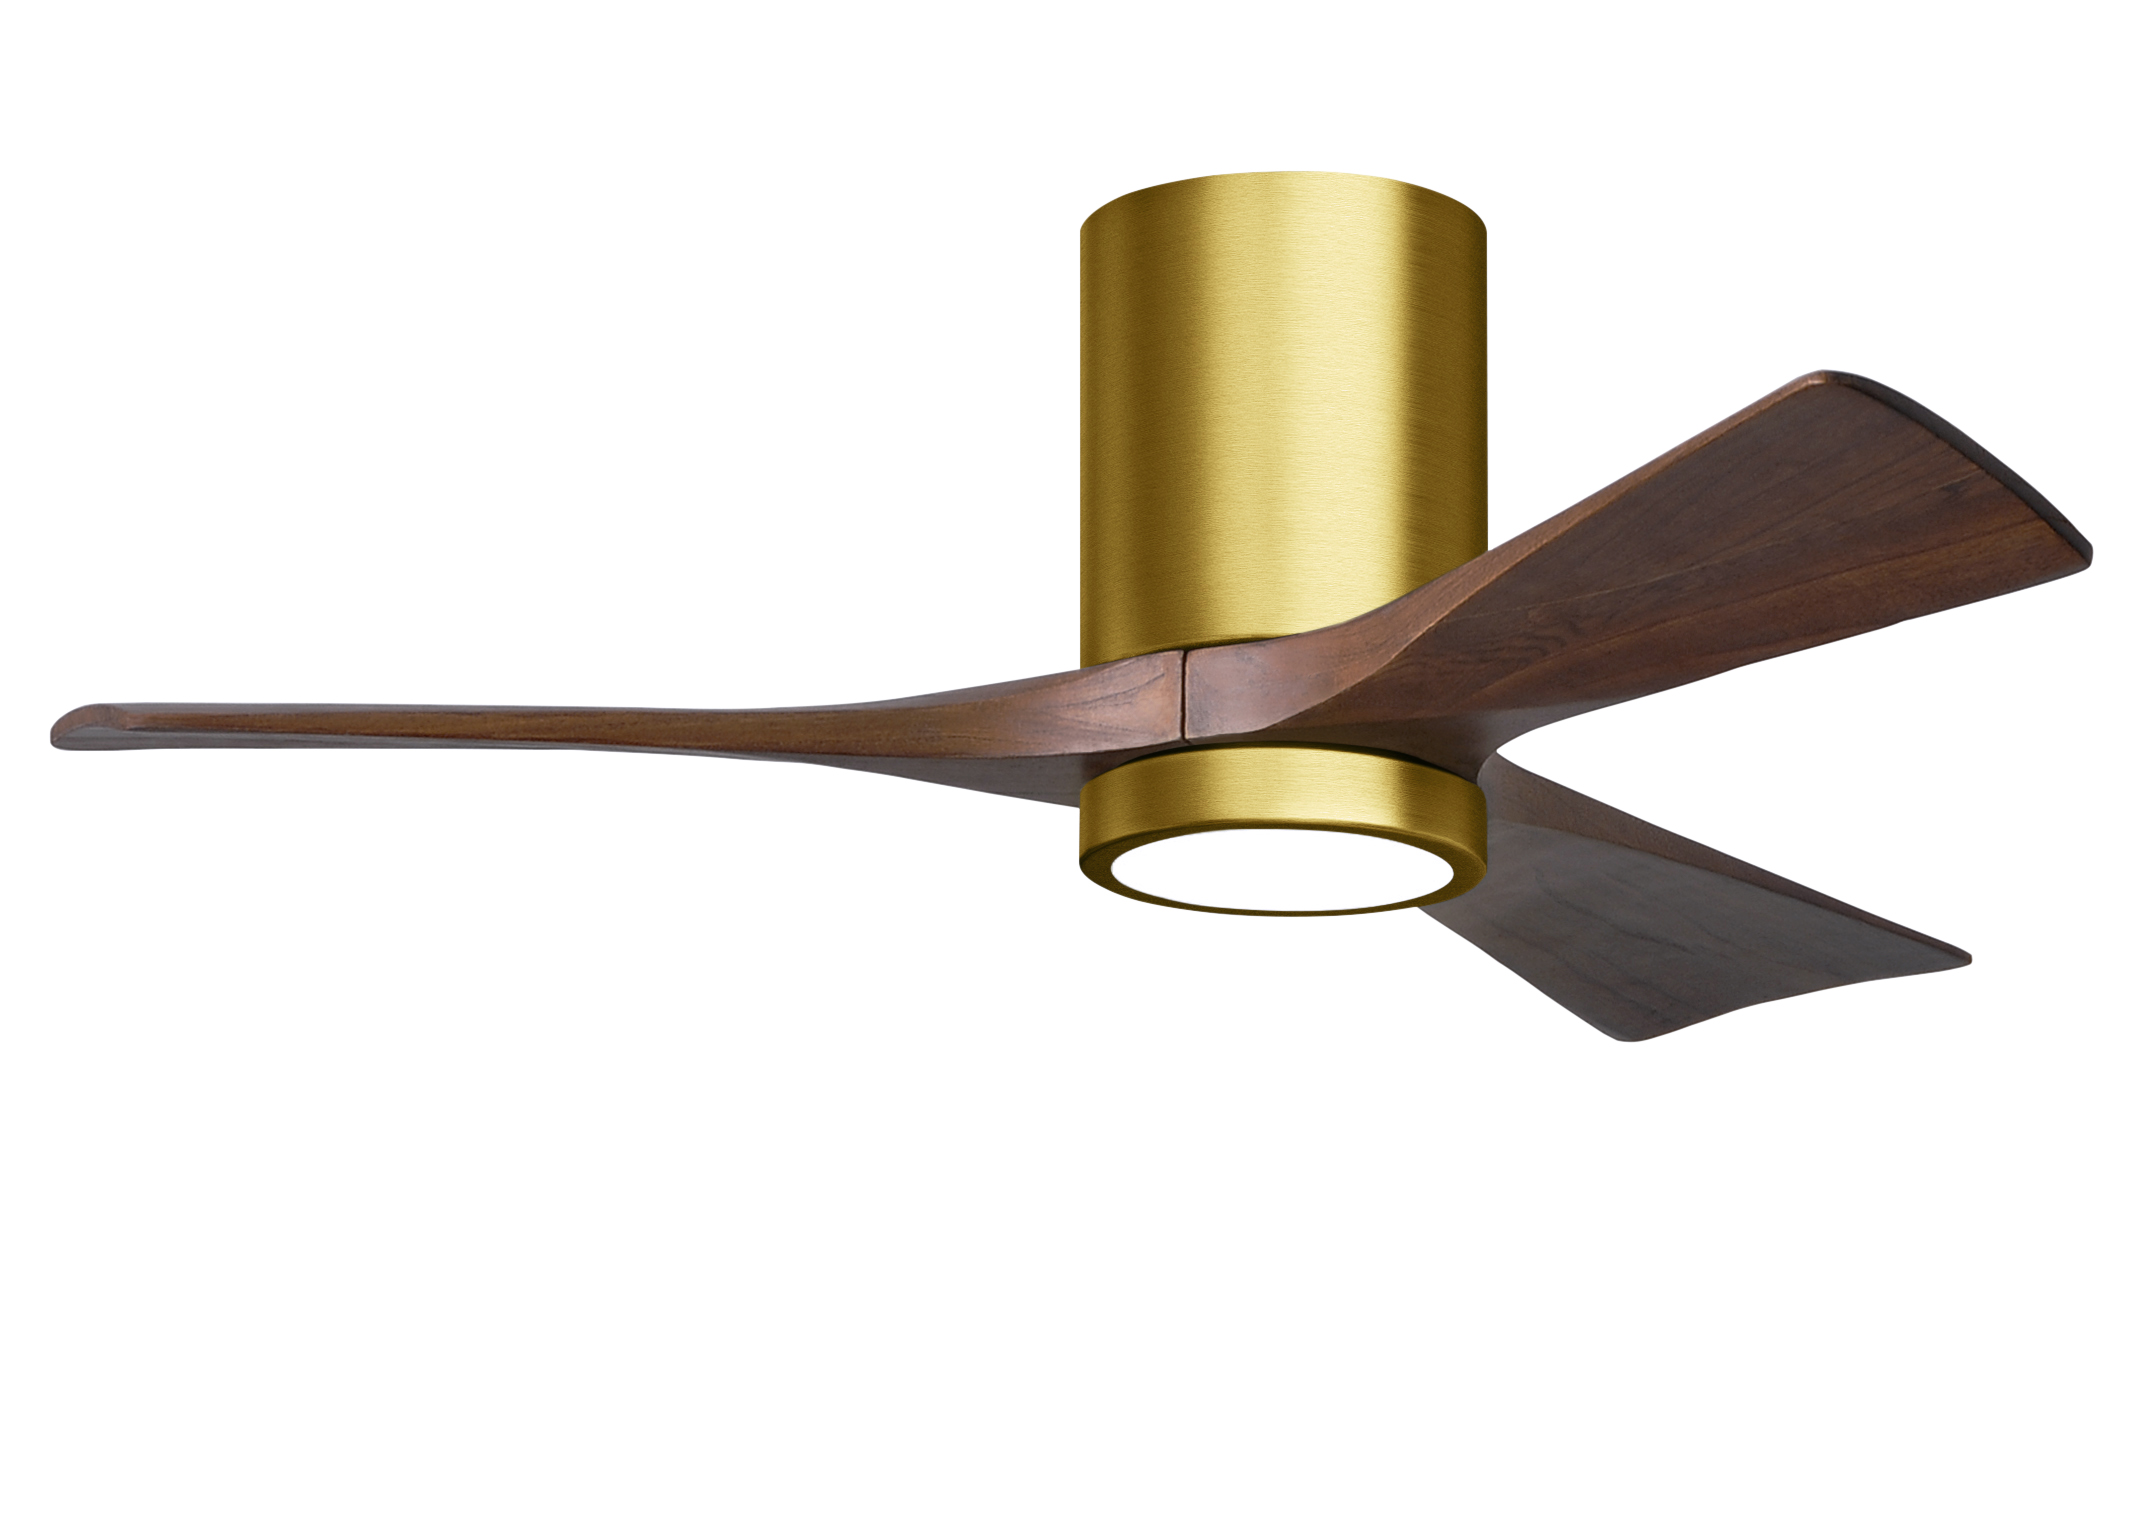 Irene-3HLK Ceiling Fan in Brushed Brass Finish with 42